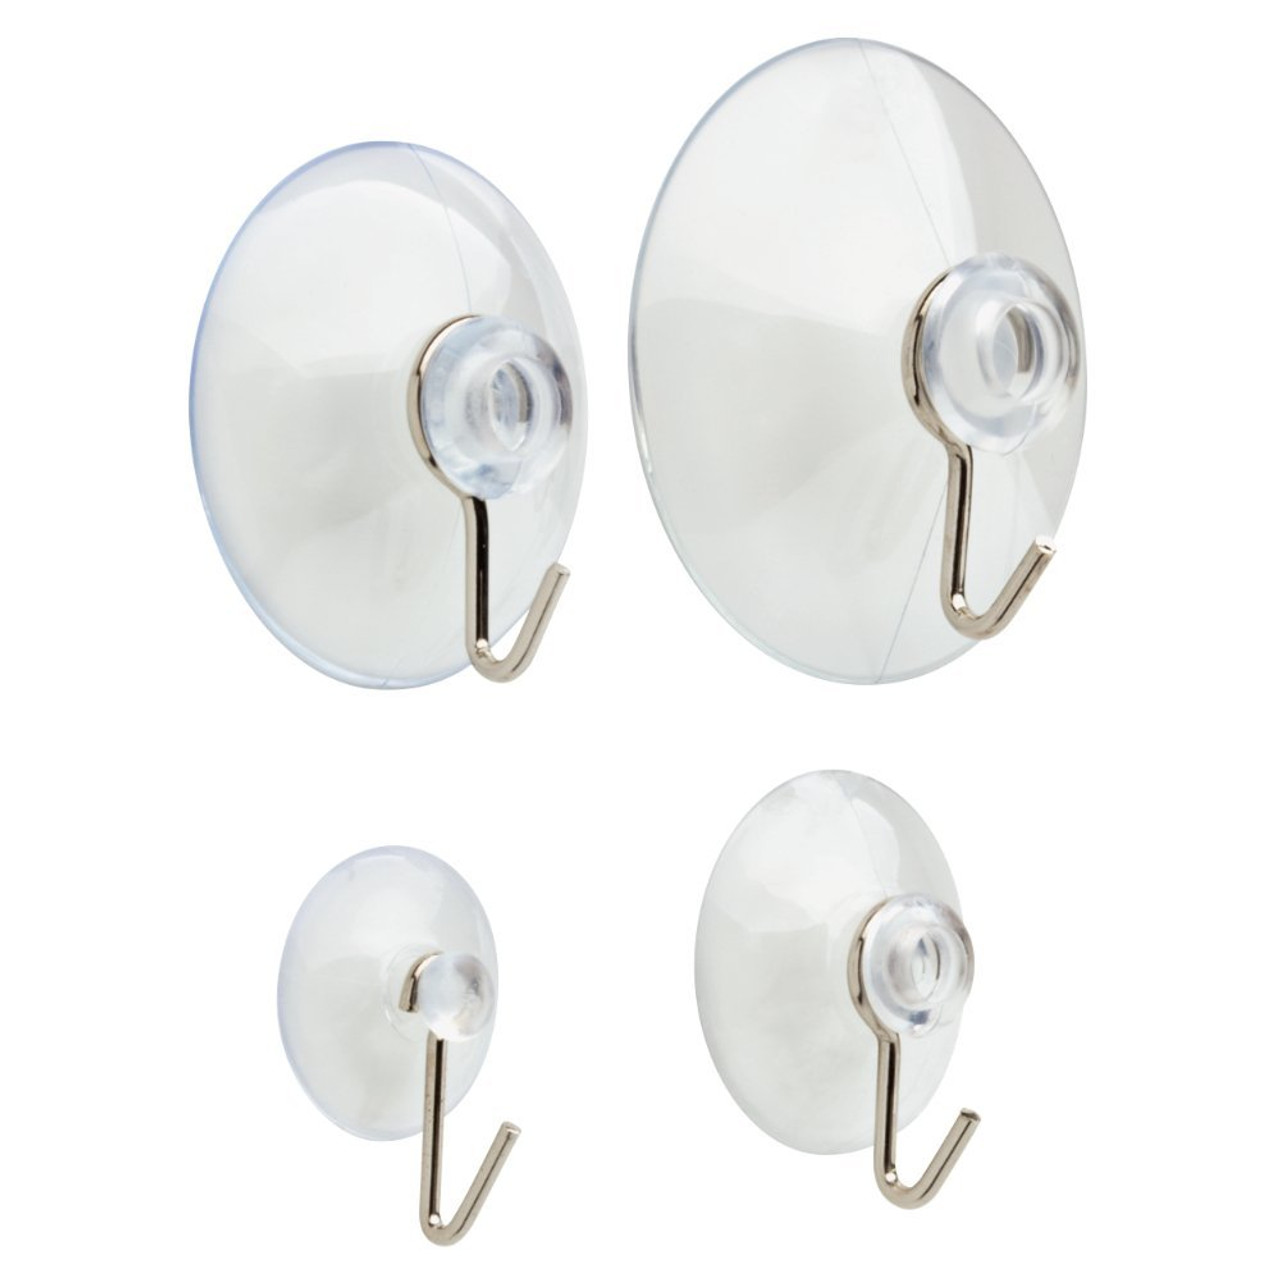 Arrow 160374 Suction Cup Hook Chrome Coat and Hat Hook Pack of 8